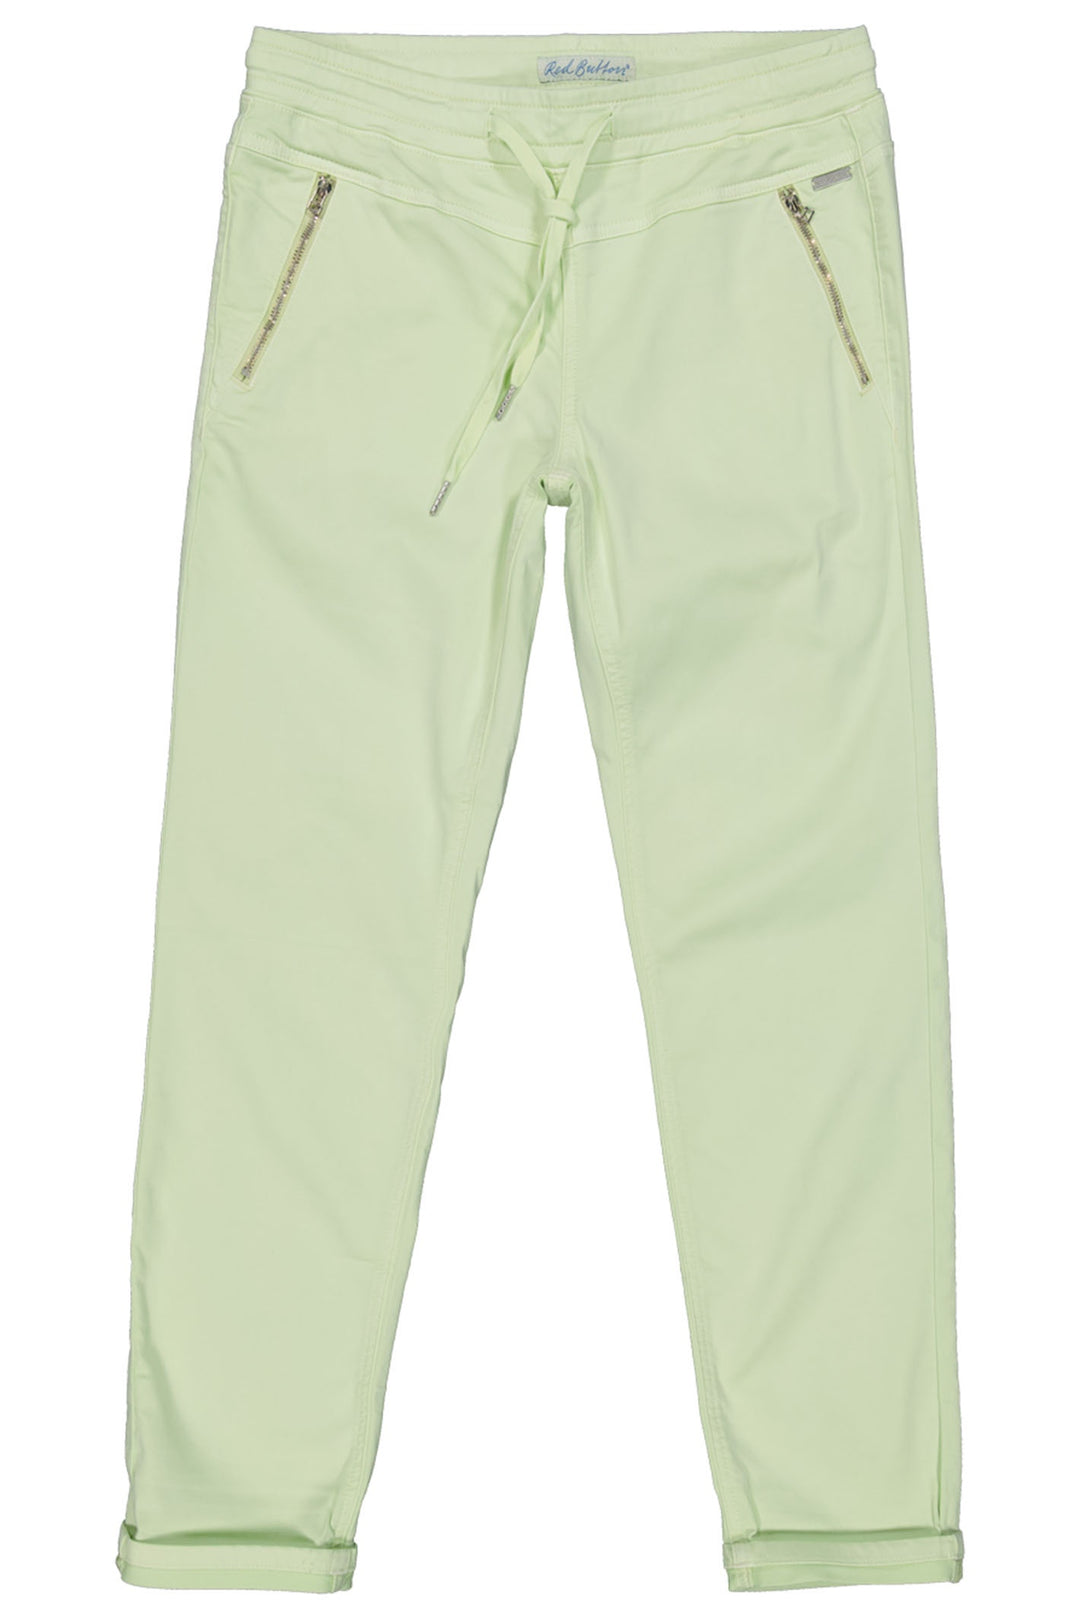 Red Button SRB3936 Tessy Lime Green Crop Jogger Trousers - Dotique